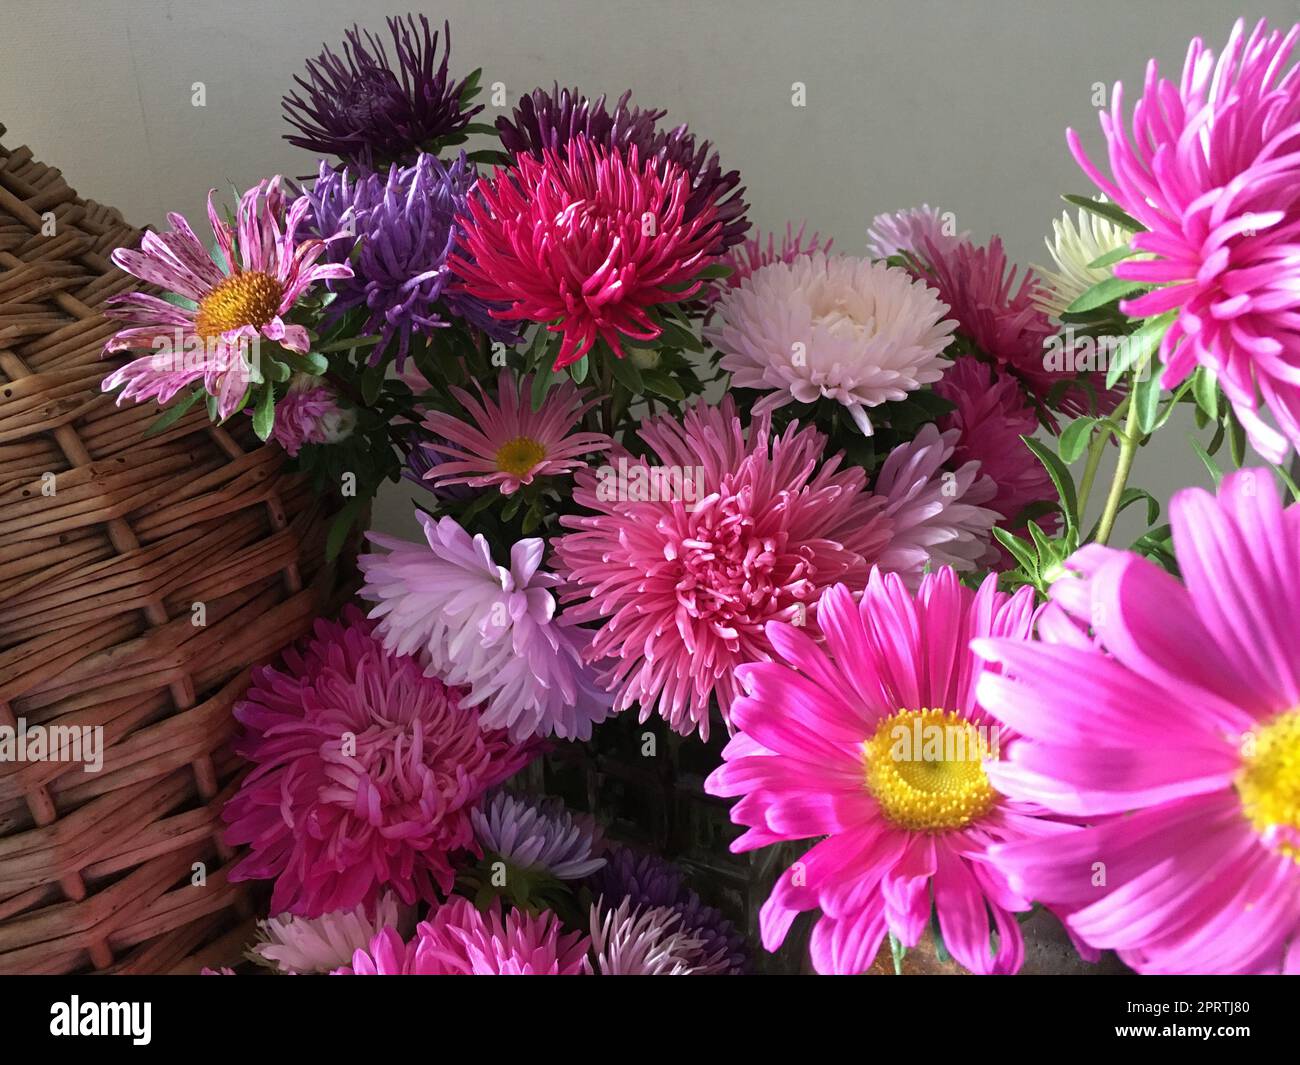 Showy flowers in bright colors: Asters beautify the garden from spring to autumn. Stock Photo